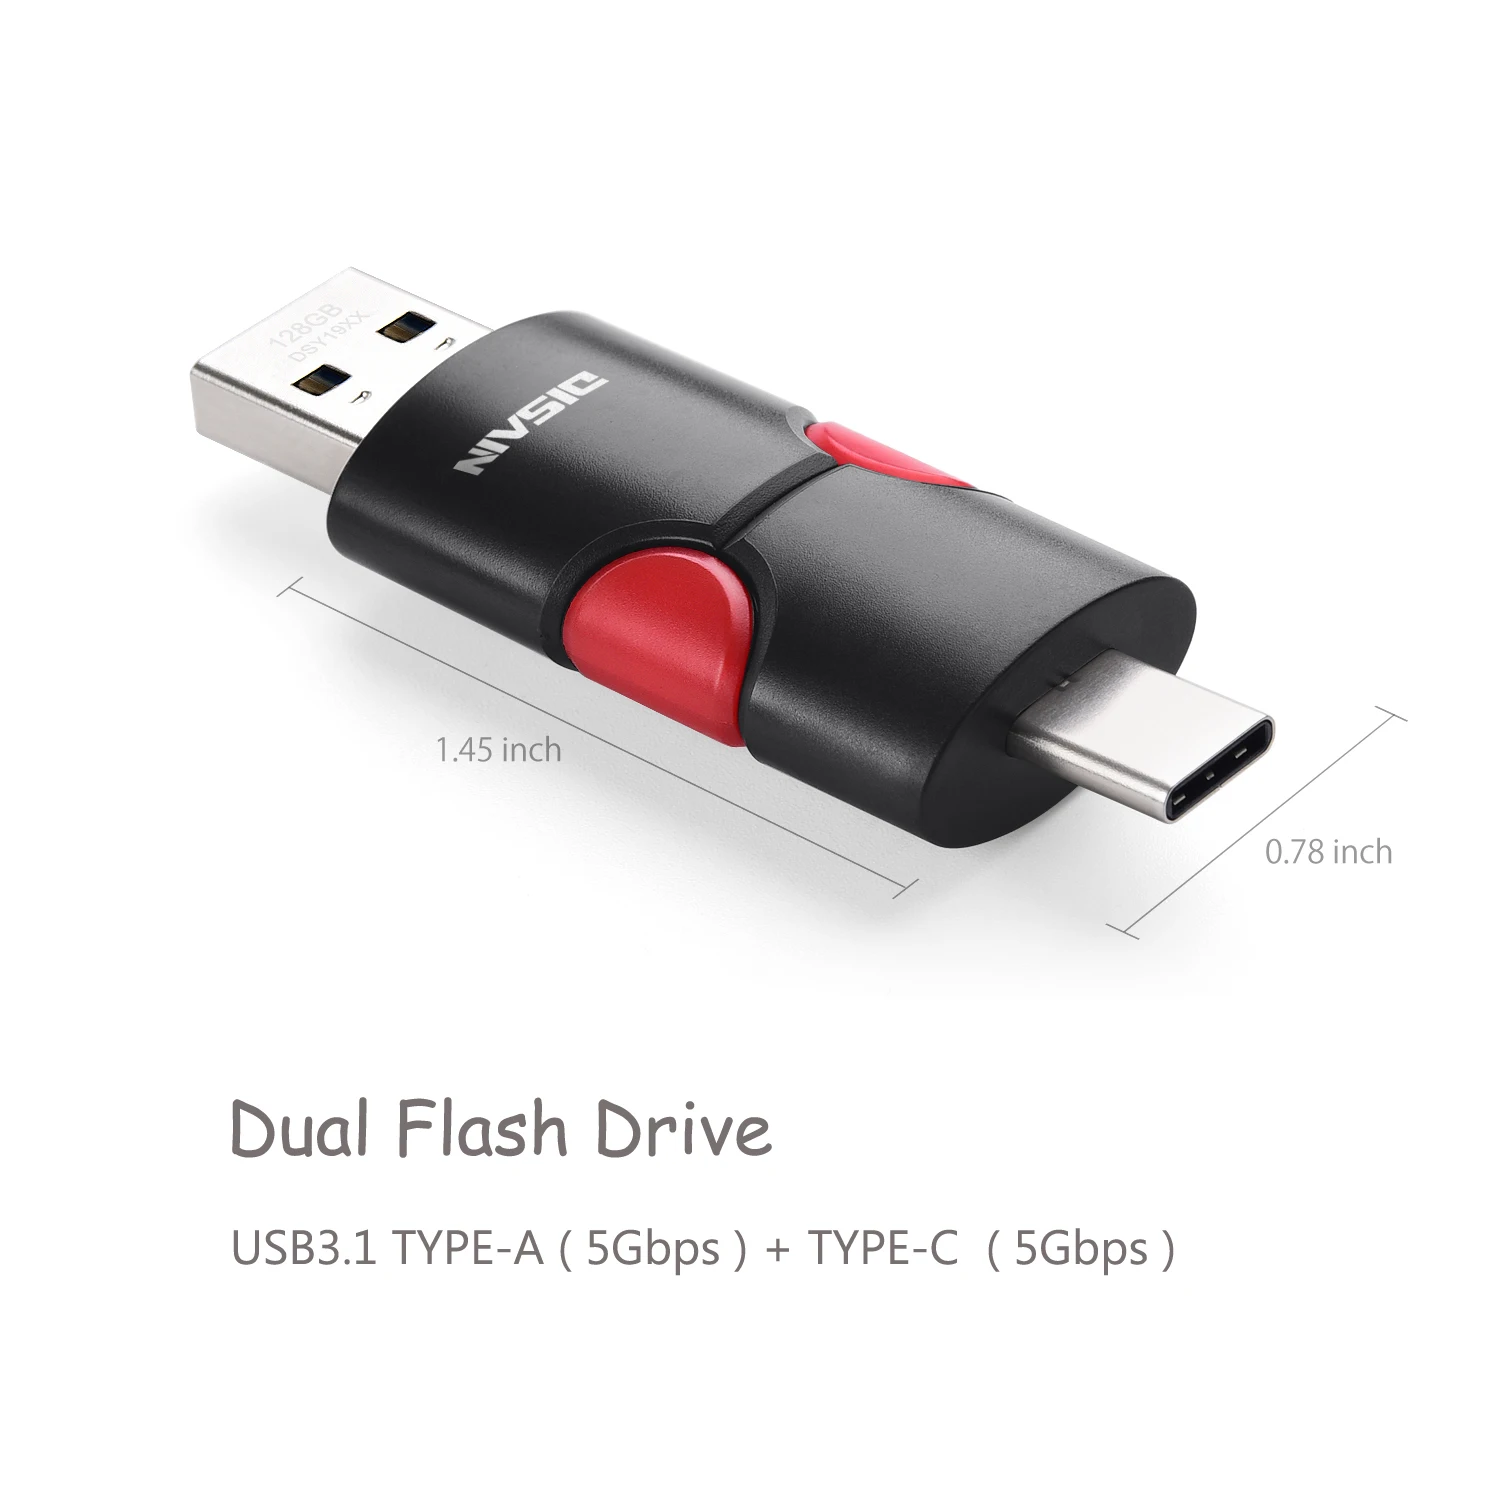 100% Authentic DISAIN 2 in 1 Type-C+USB 3.0 Flash Drive External Storage Memory Stick 64GB 128 GB Pen Drives For Computer Office custom usb drives USB Flash Drives